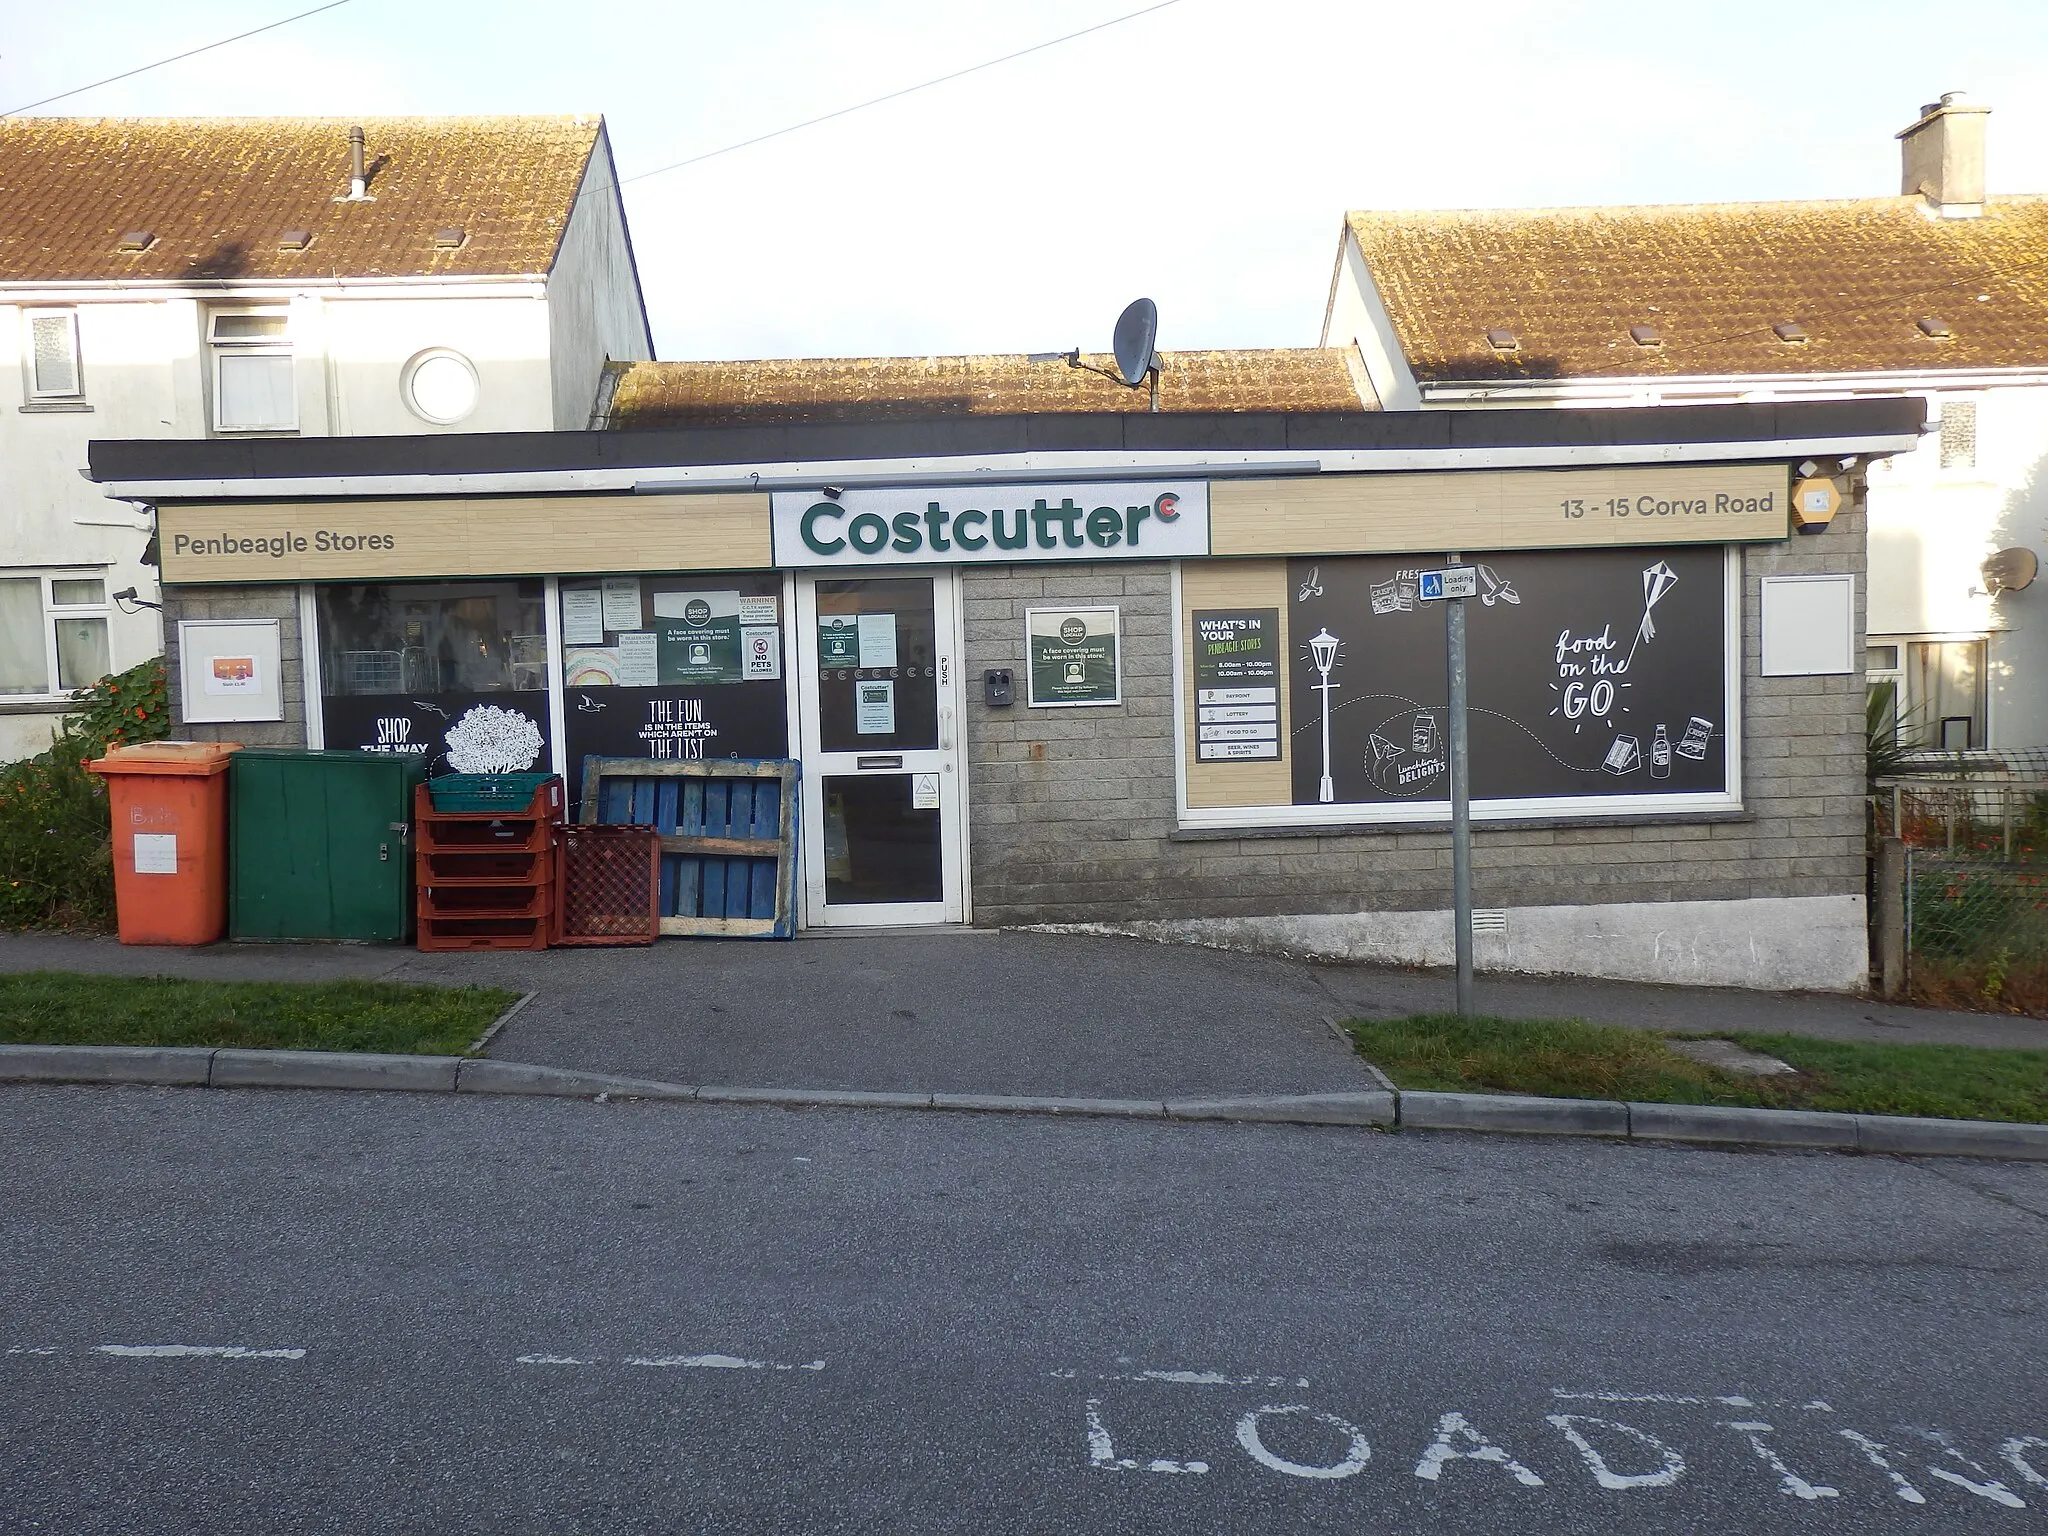 Photo showing: Penbeagle Stores, a convenience store in Corva Road St. Ives, Cornwall, UK